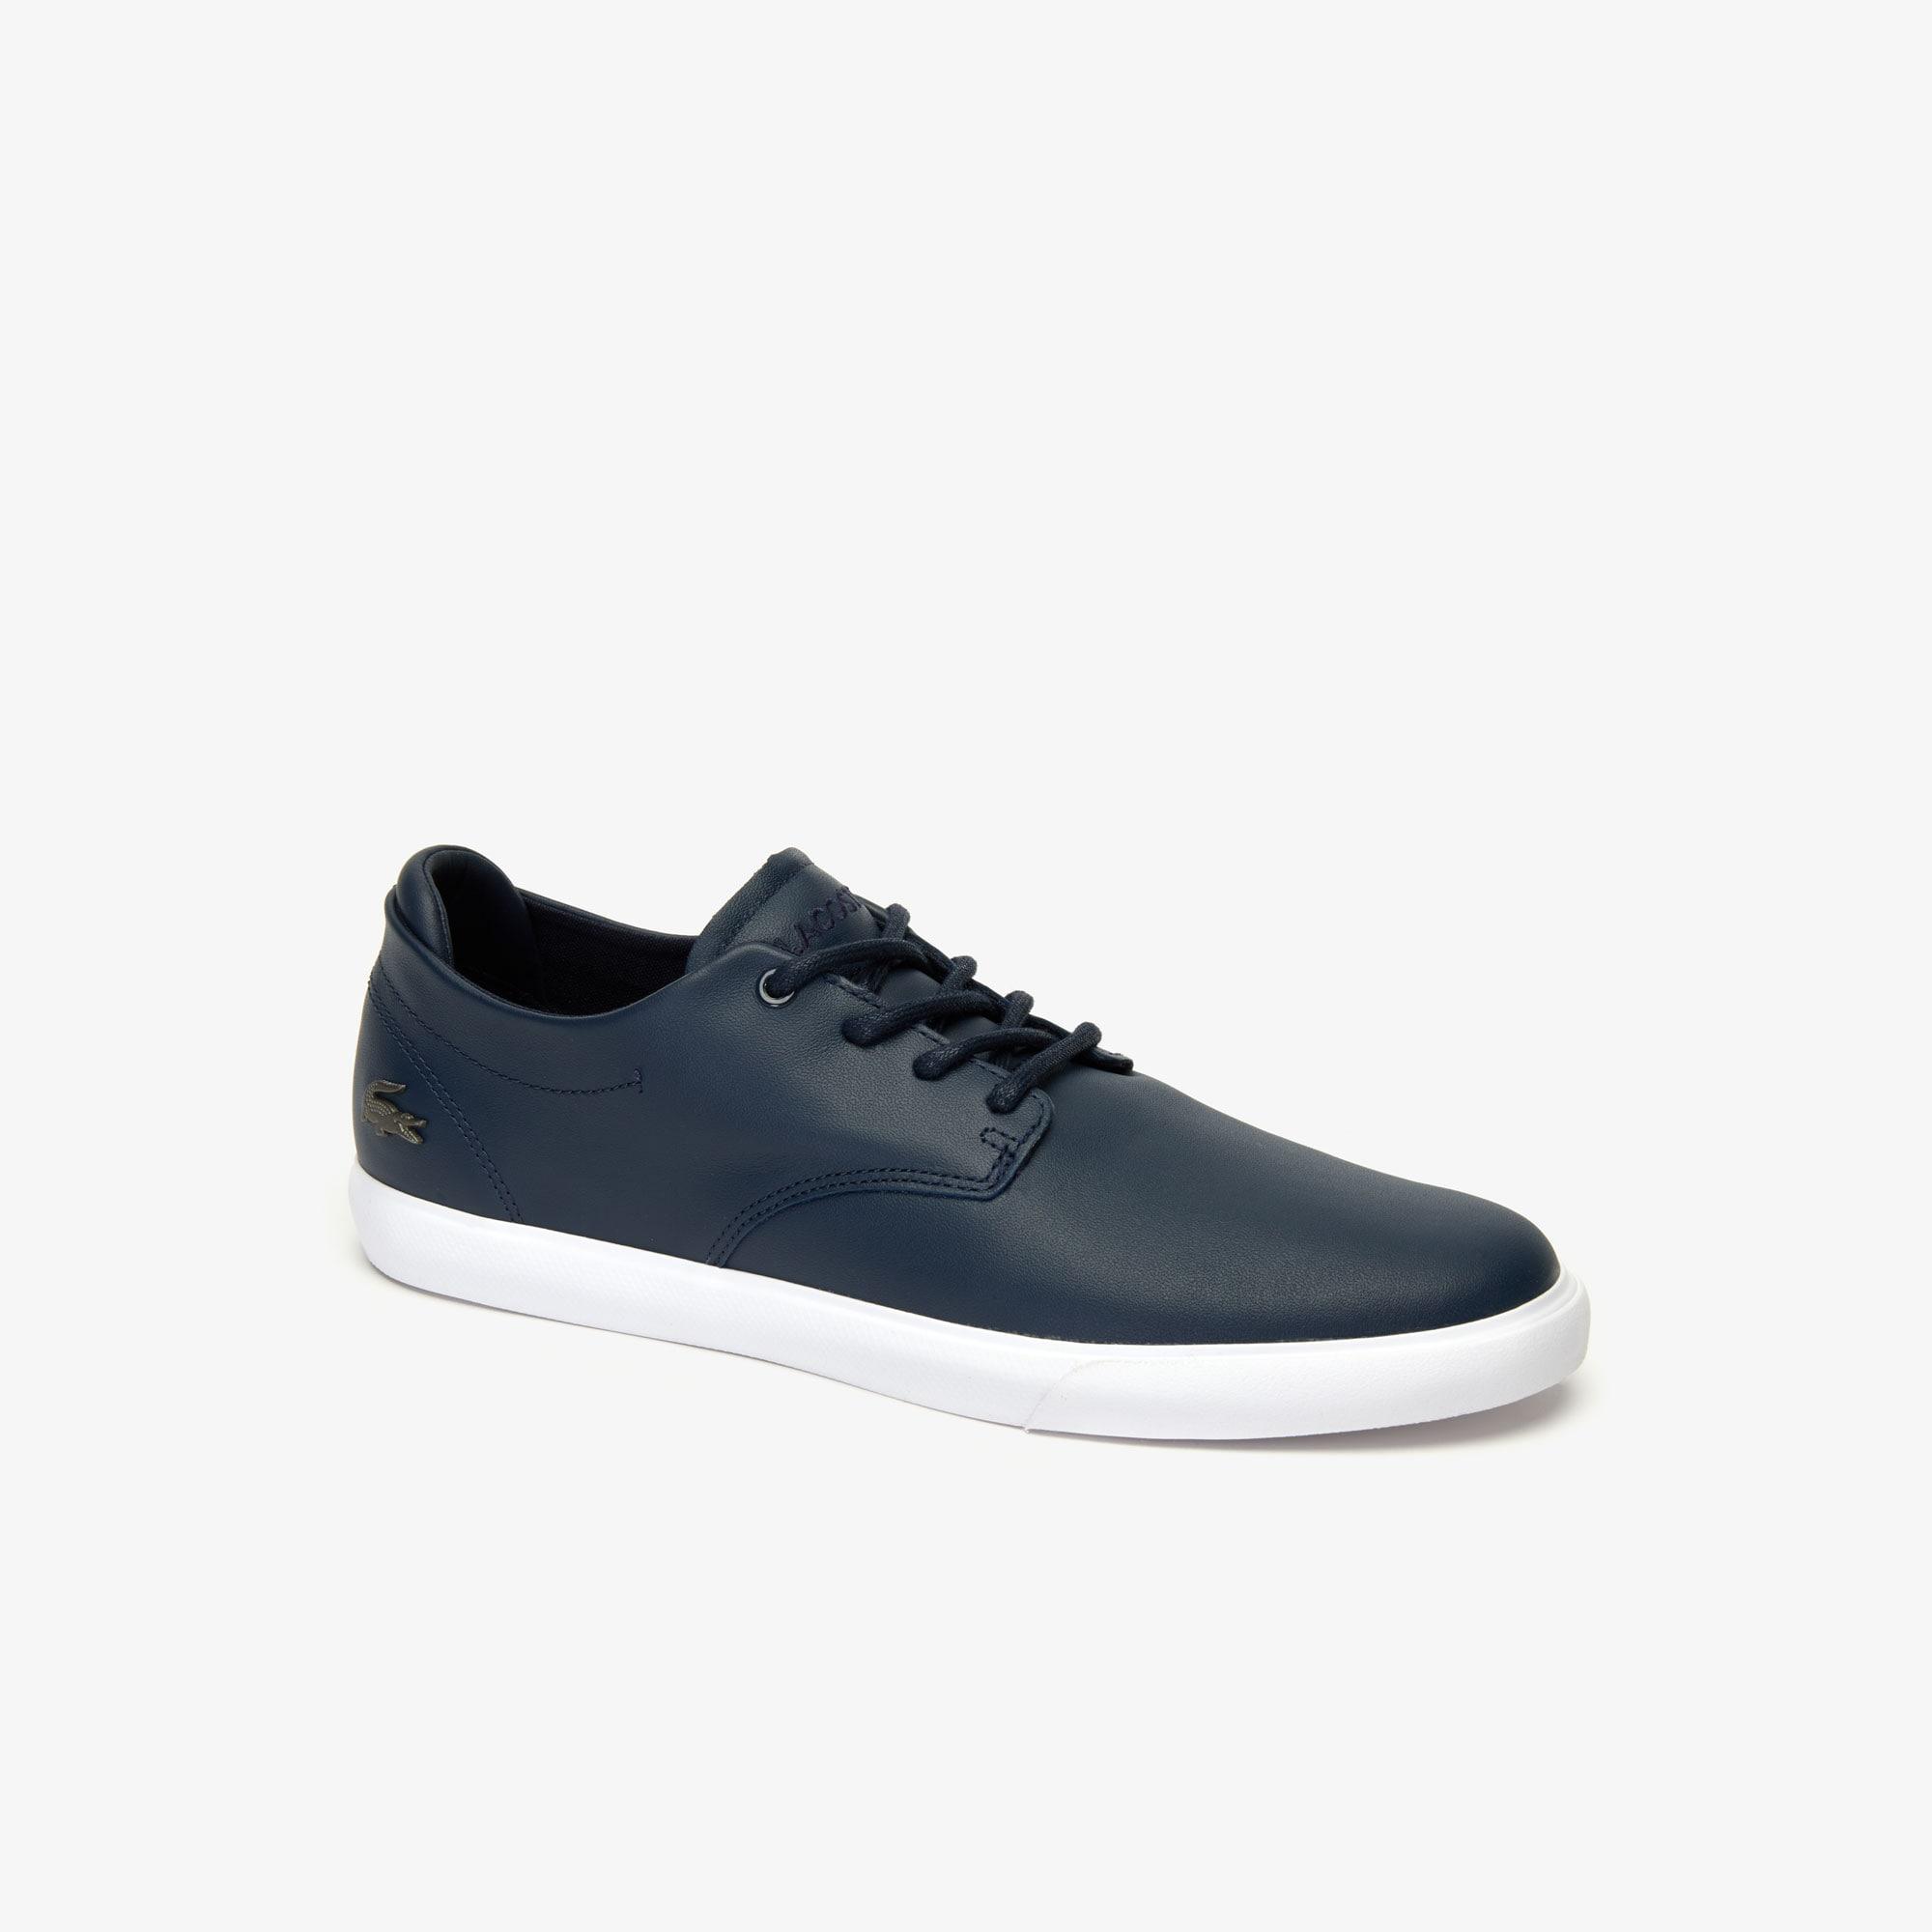 Lacoste Esparre Leather Trainers in Blue for Men - Lyst